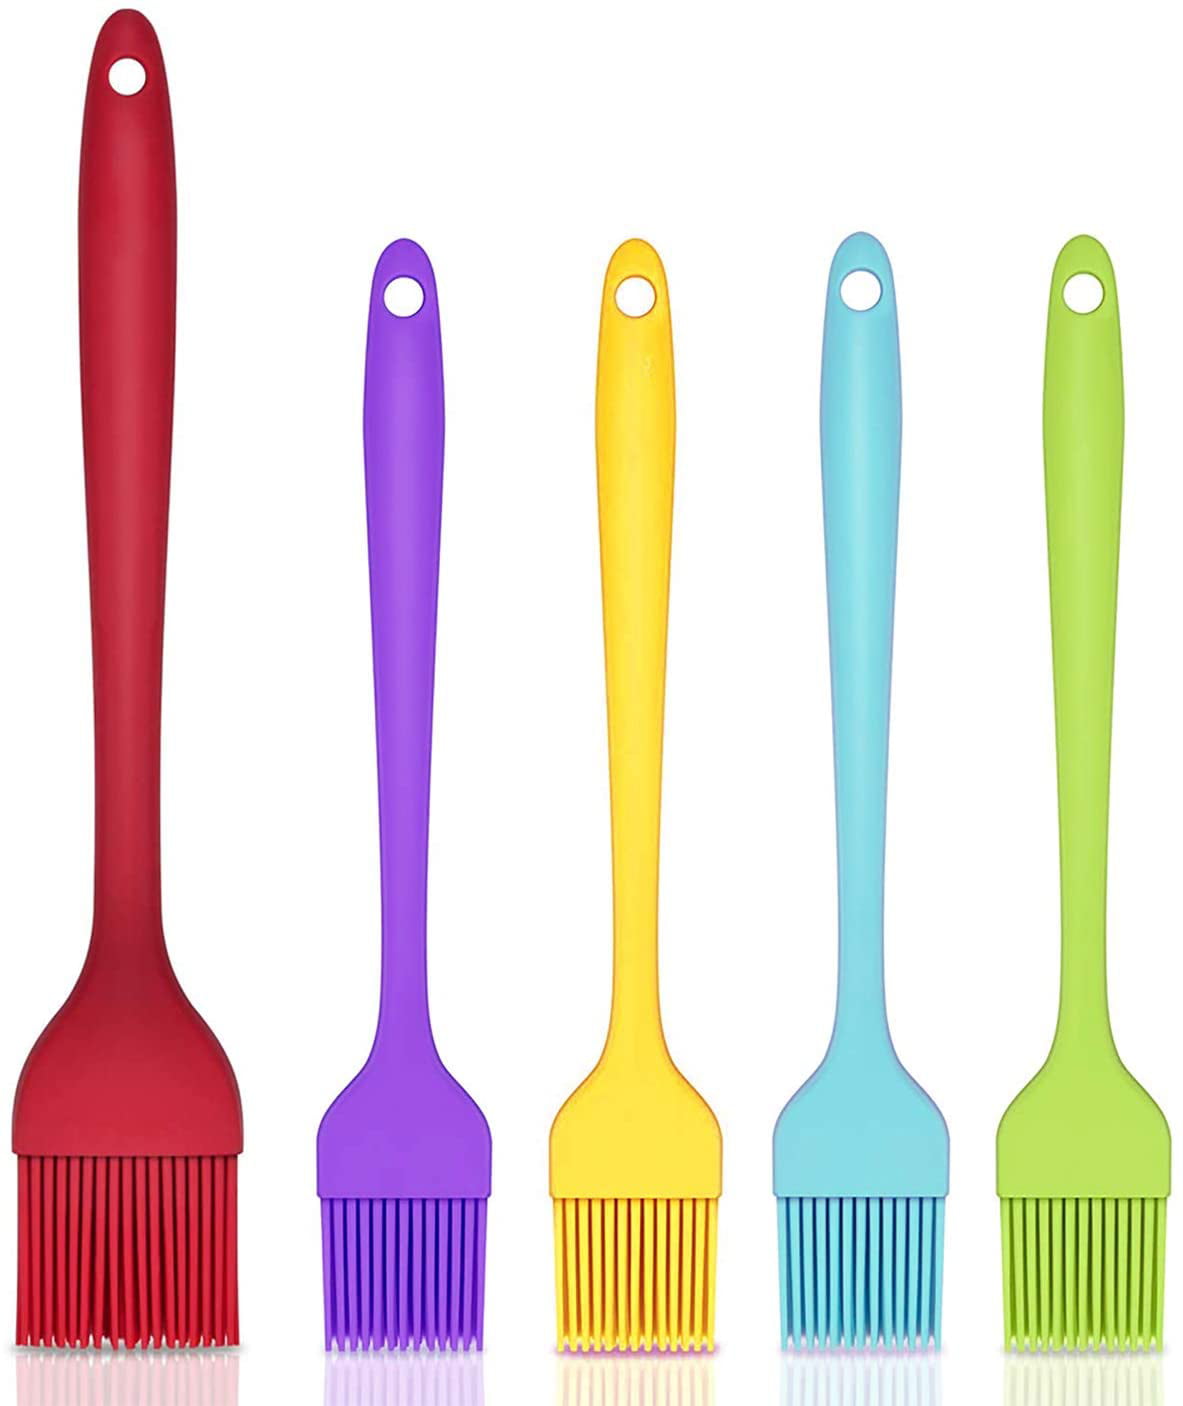 5 Pieces Silicone Basting Brush Pastry Baking Brush Silicone Barbecue Pastry Brush for BBQ Baking Cooking Spread Oil Butter Sauce Marinades 